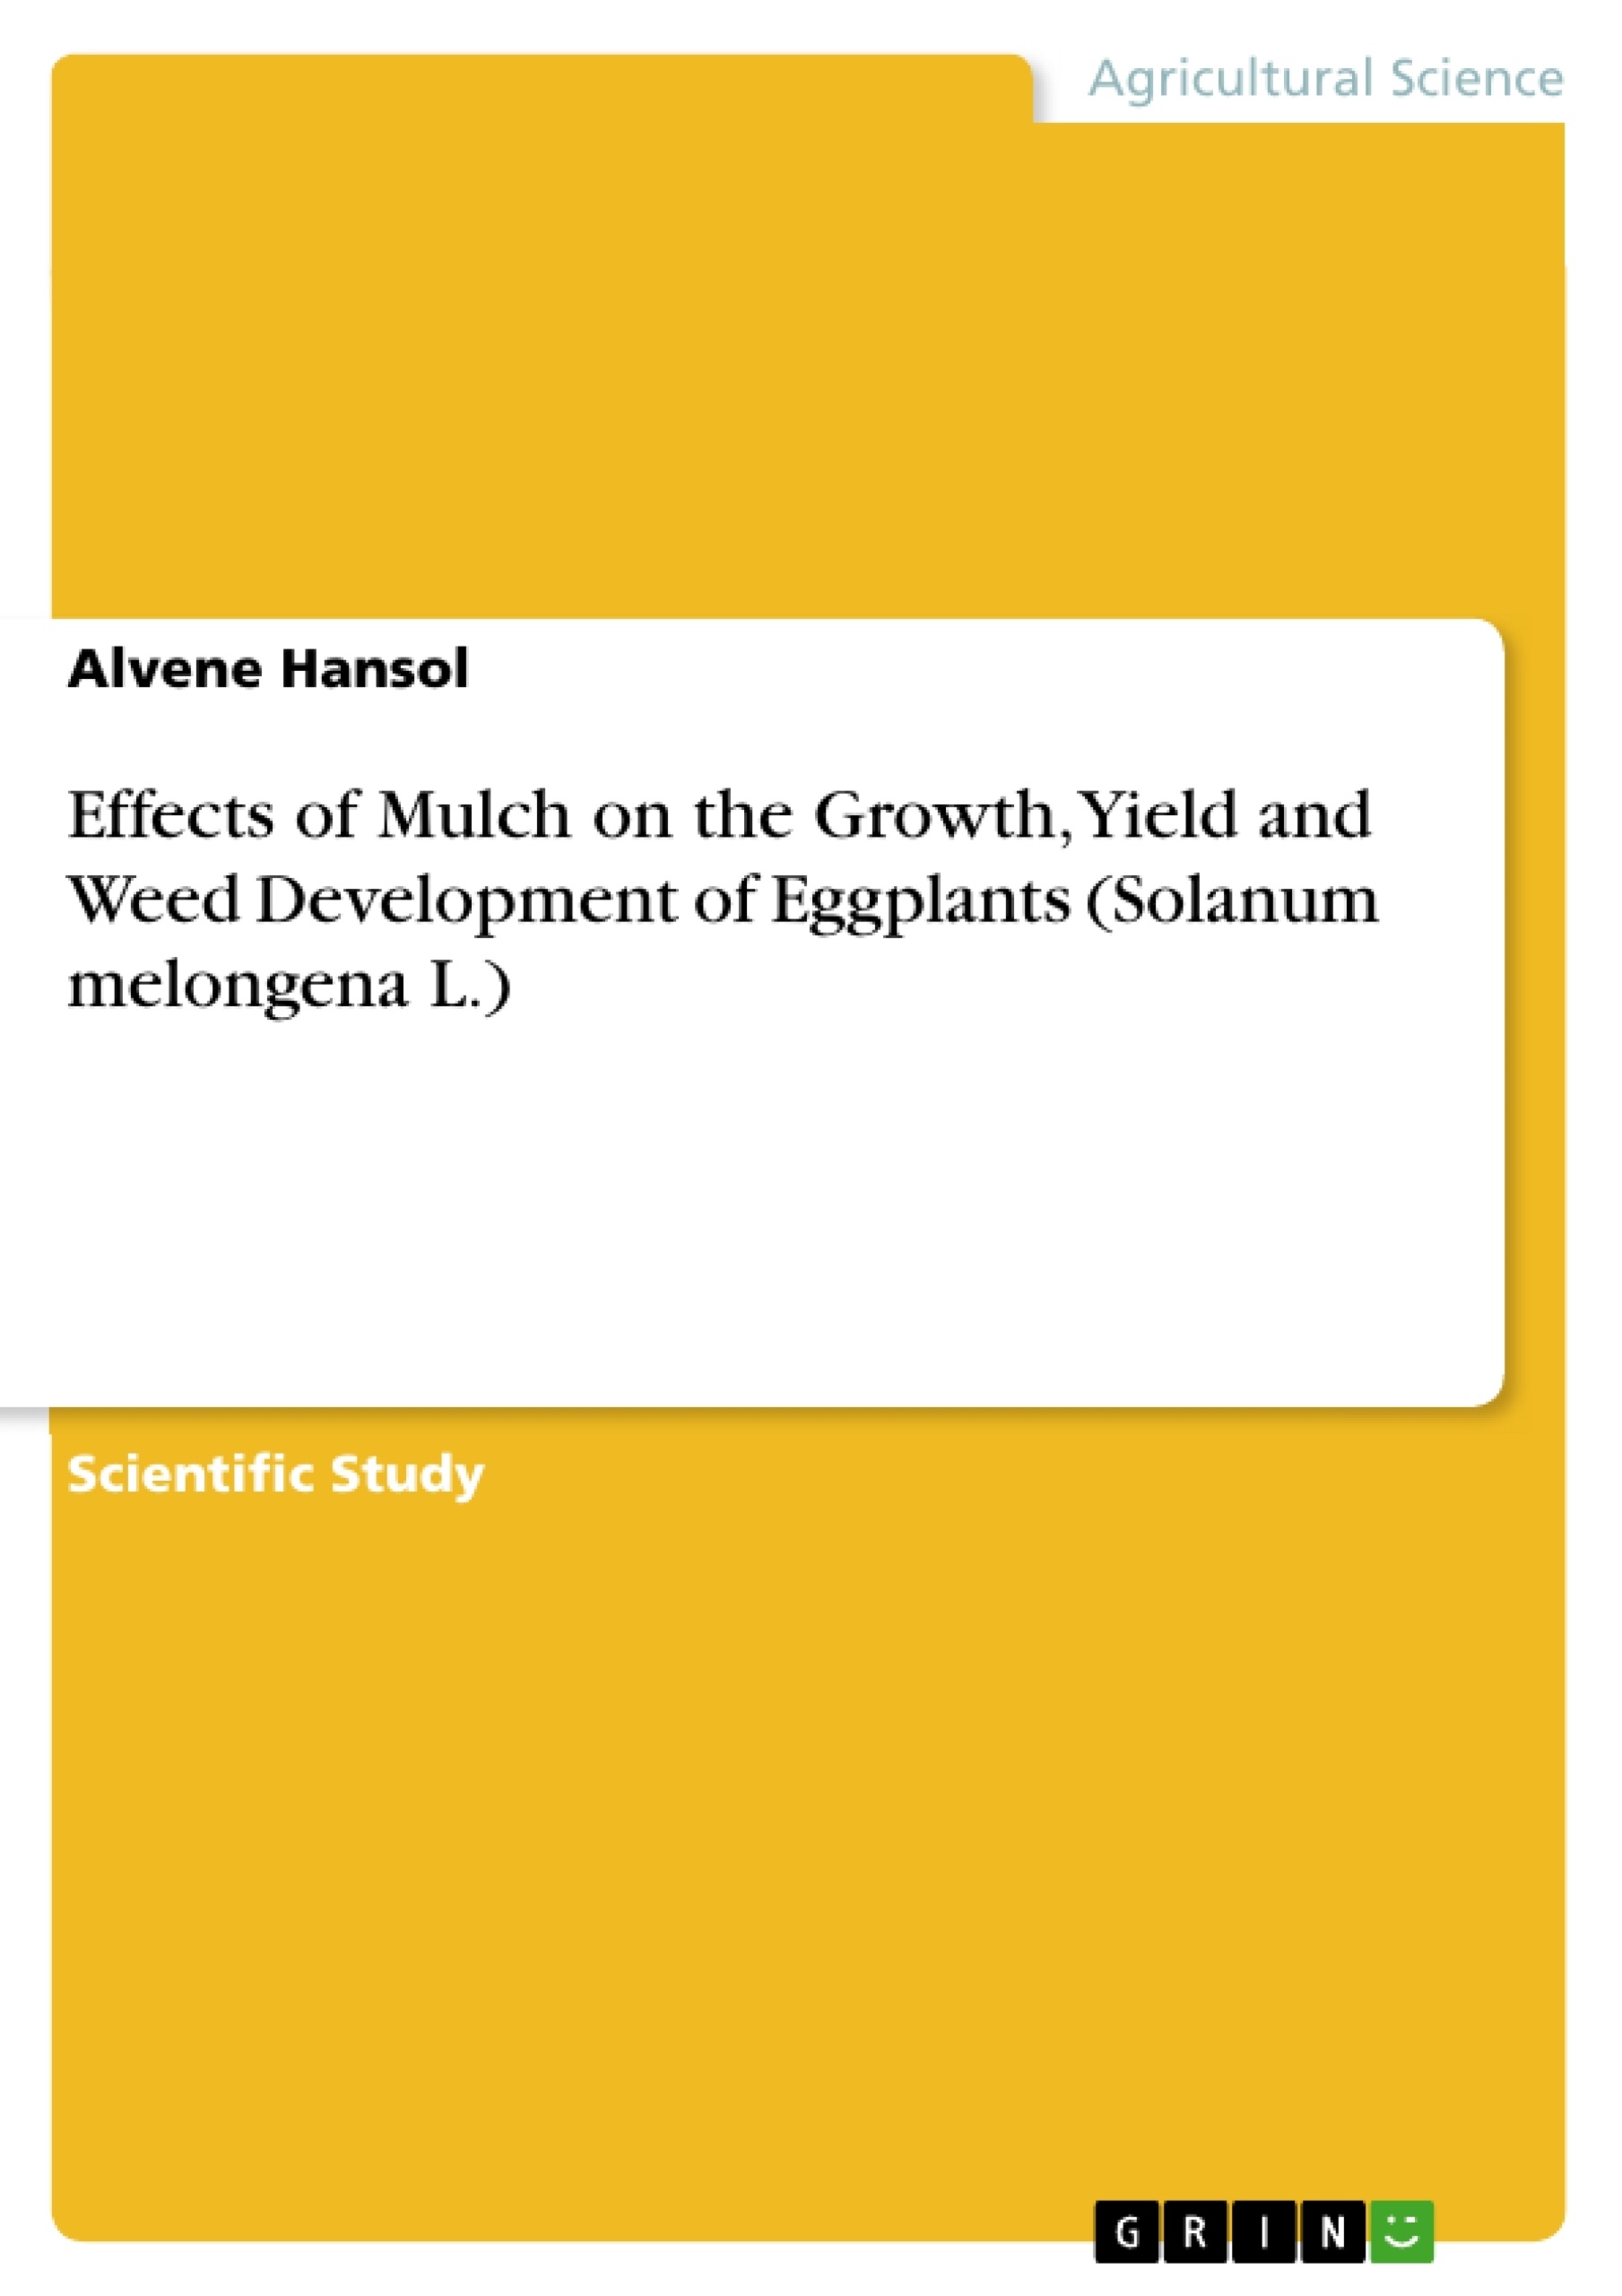 Título: Effects of Mulch on the Growth, Yield and Weed Development of Eggplants (Solanum melongena L.)